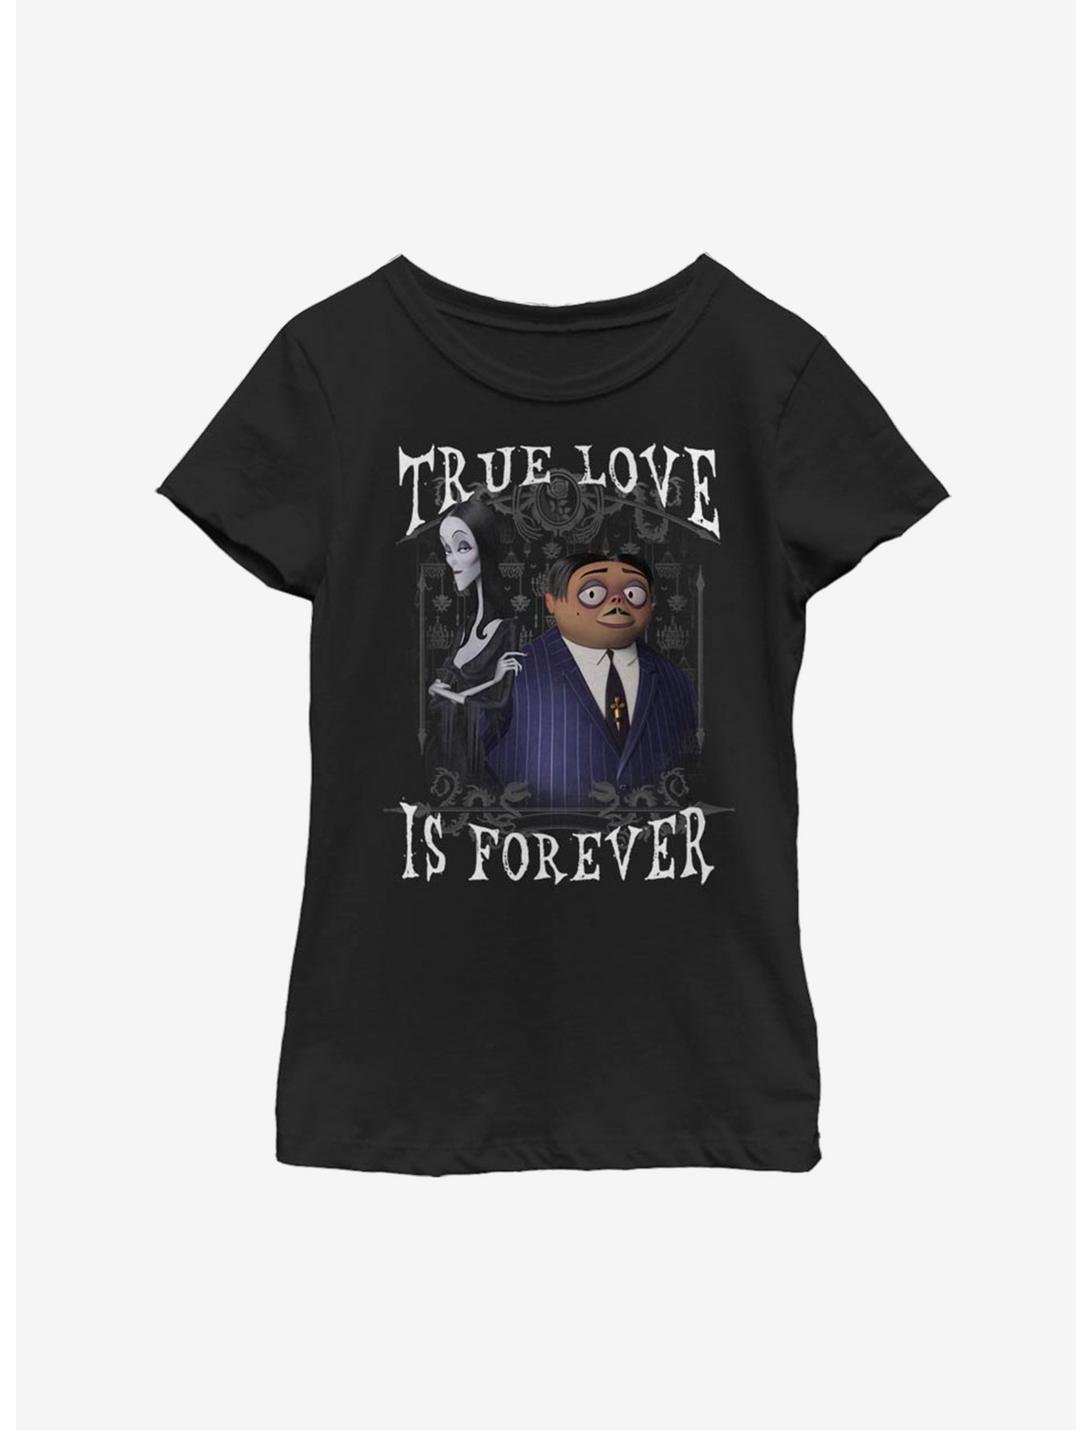 The Addams Family Forever Youth Girls T-Shirt, BLACK, hi-res